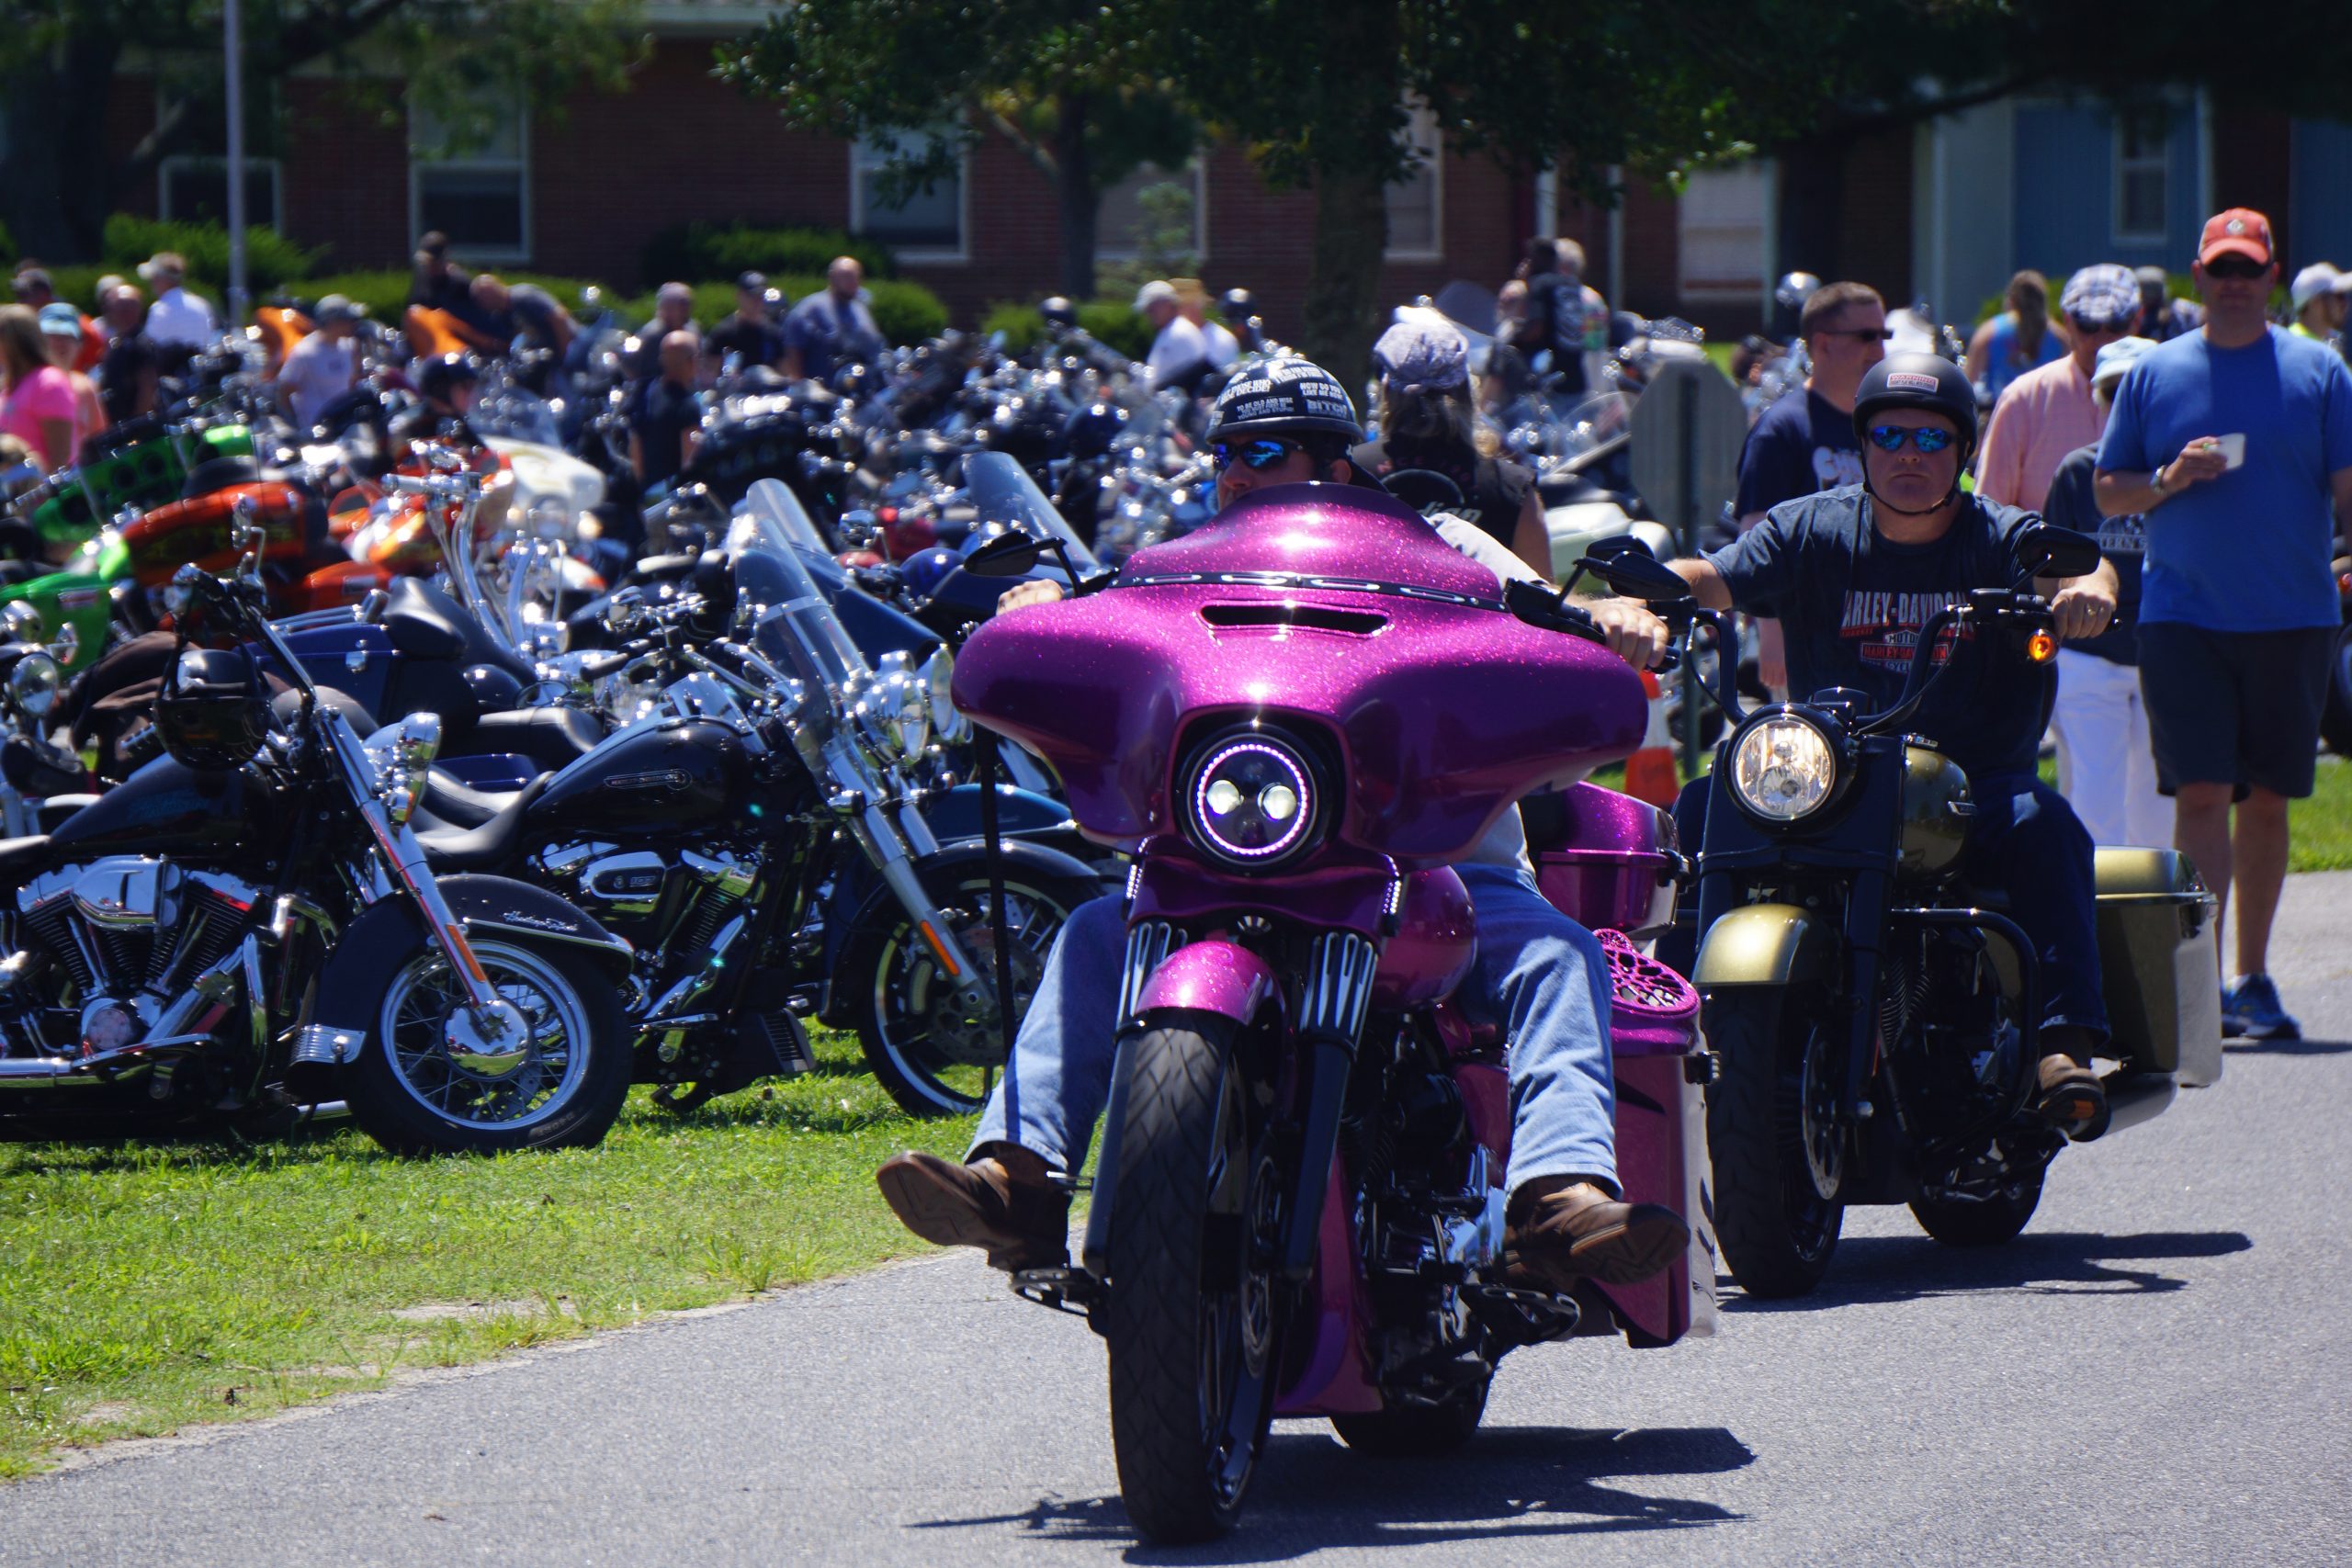 Man riding sparkly purple motorcycle.